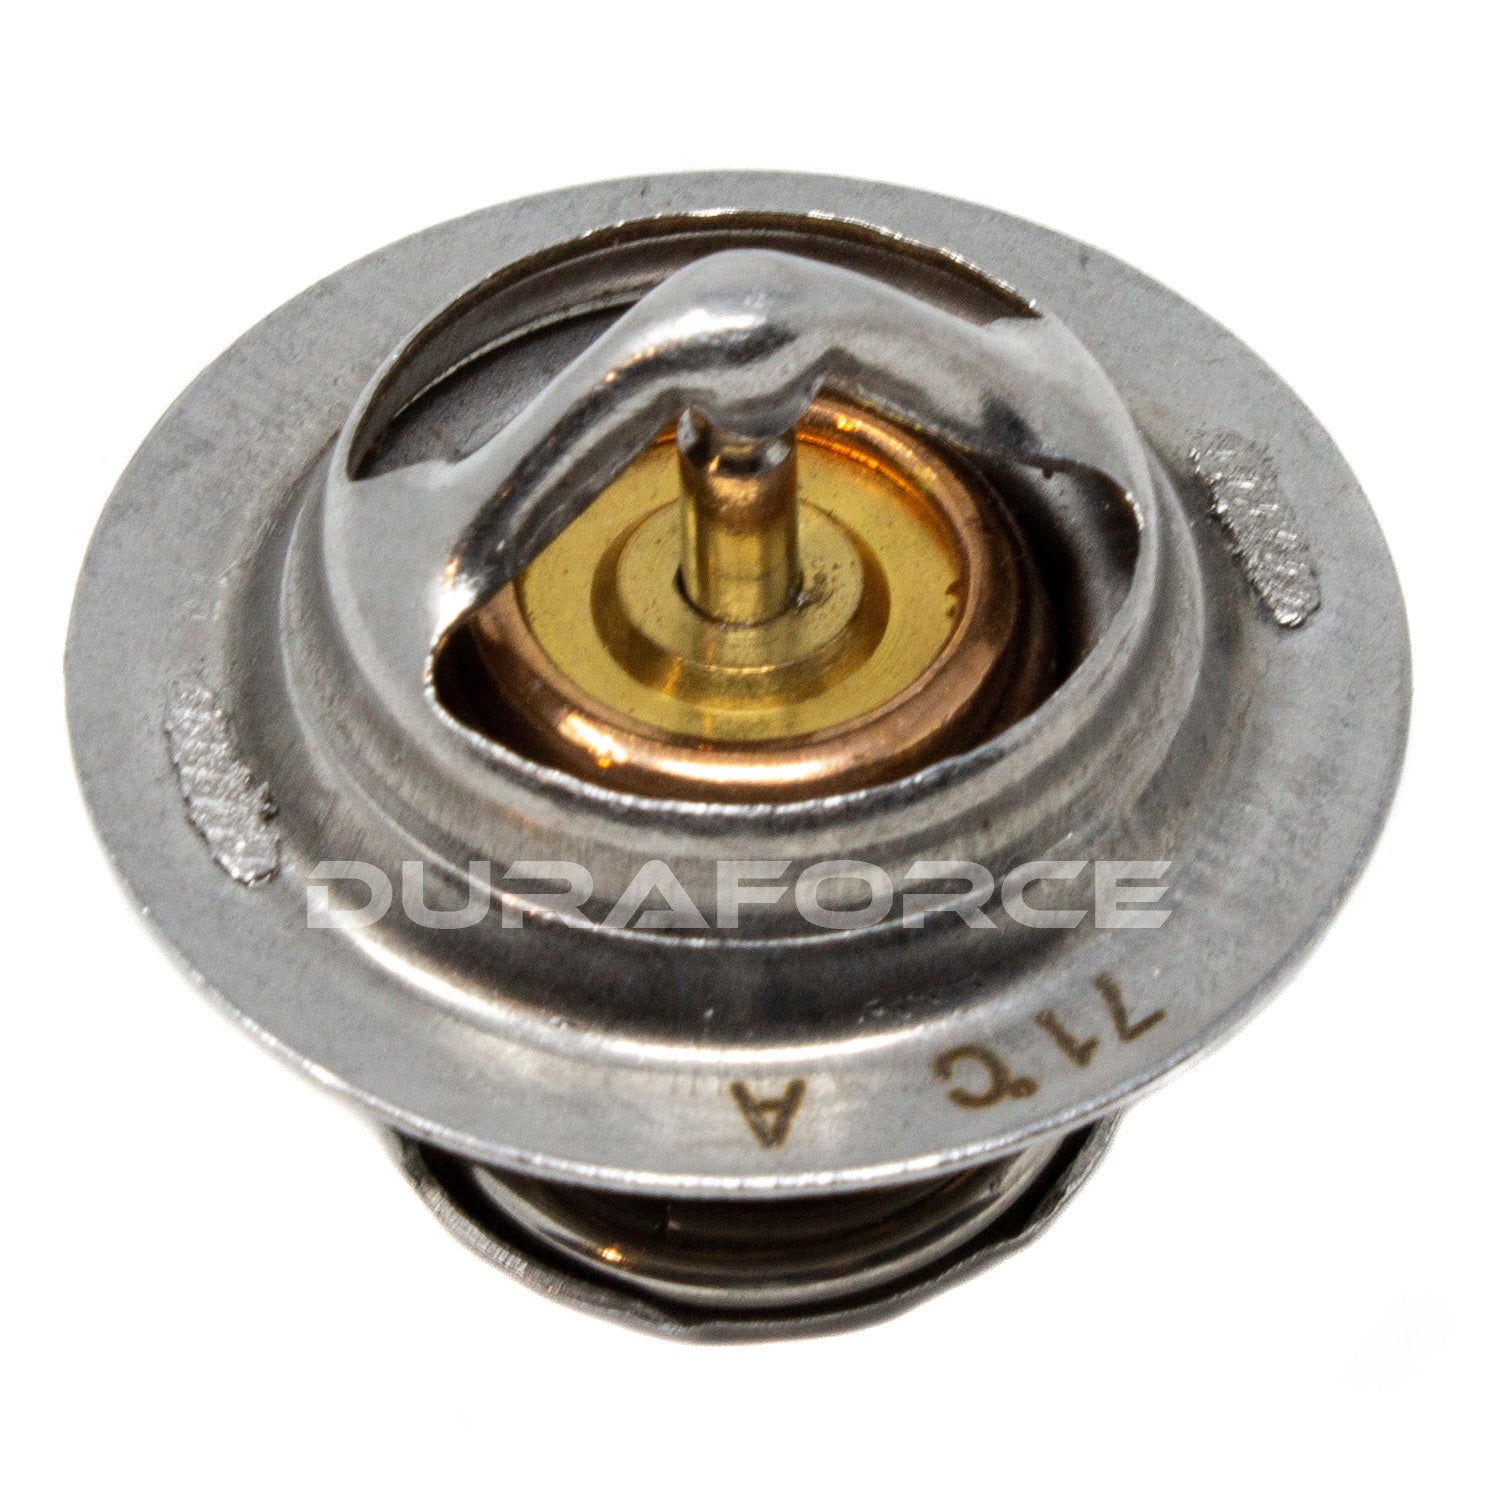 Duraforce 6653948, Thermostat For Bobcat